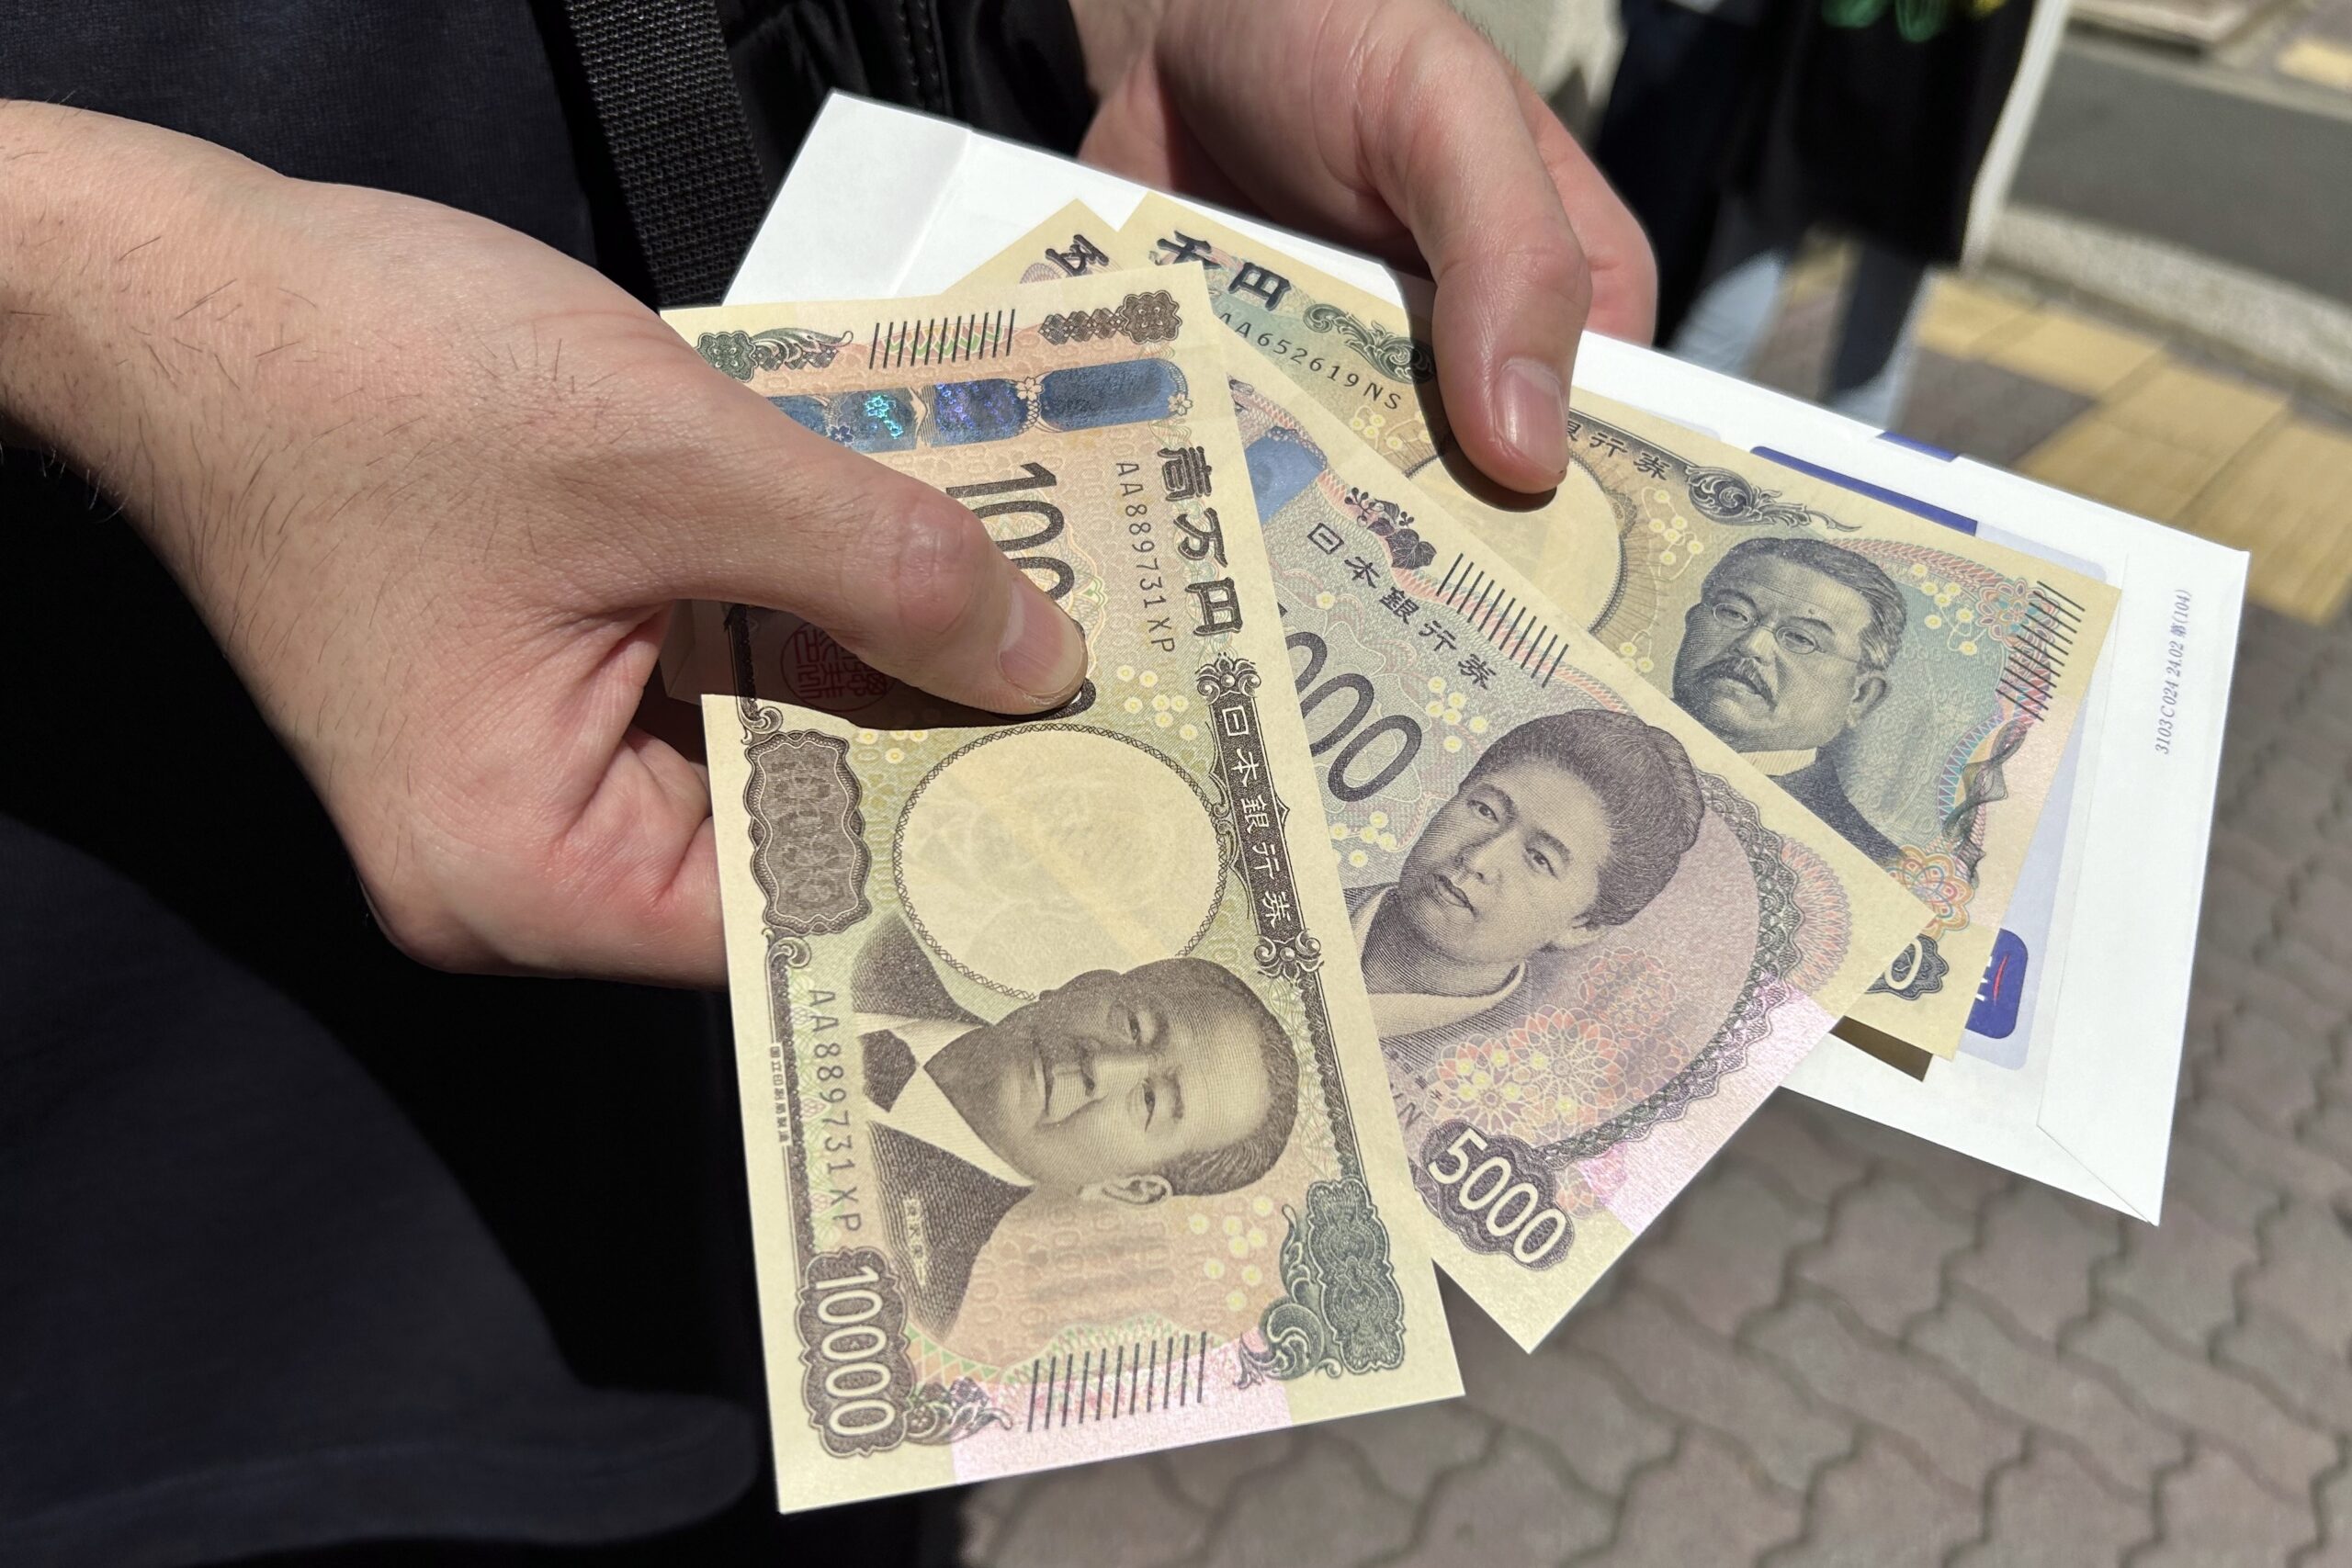 Cash-based Japan issues first new bills in two decades, designed against counterfeiting